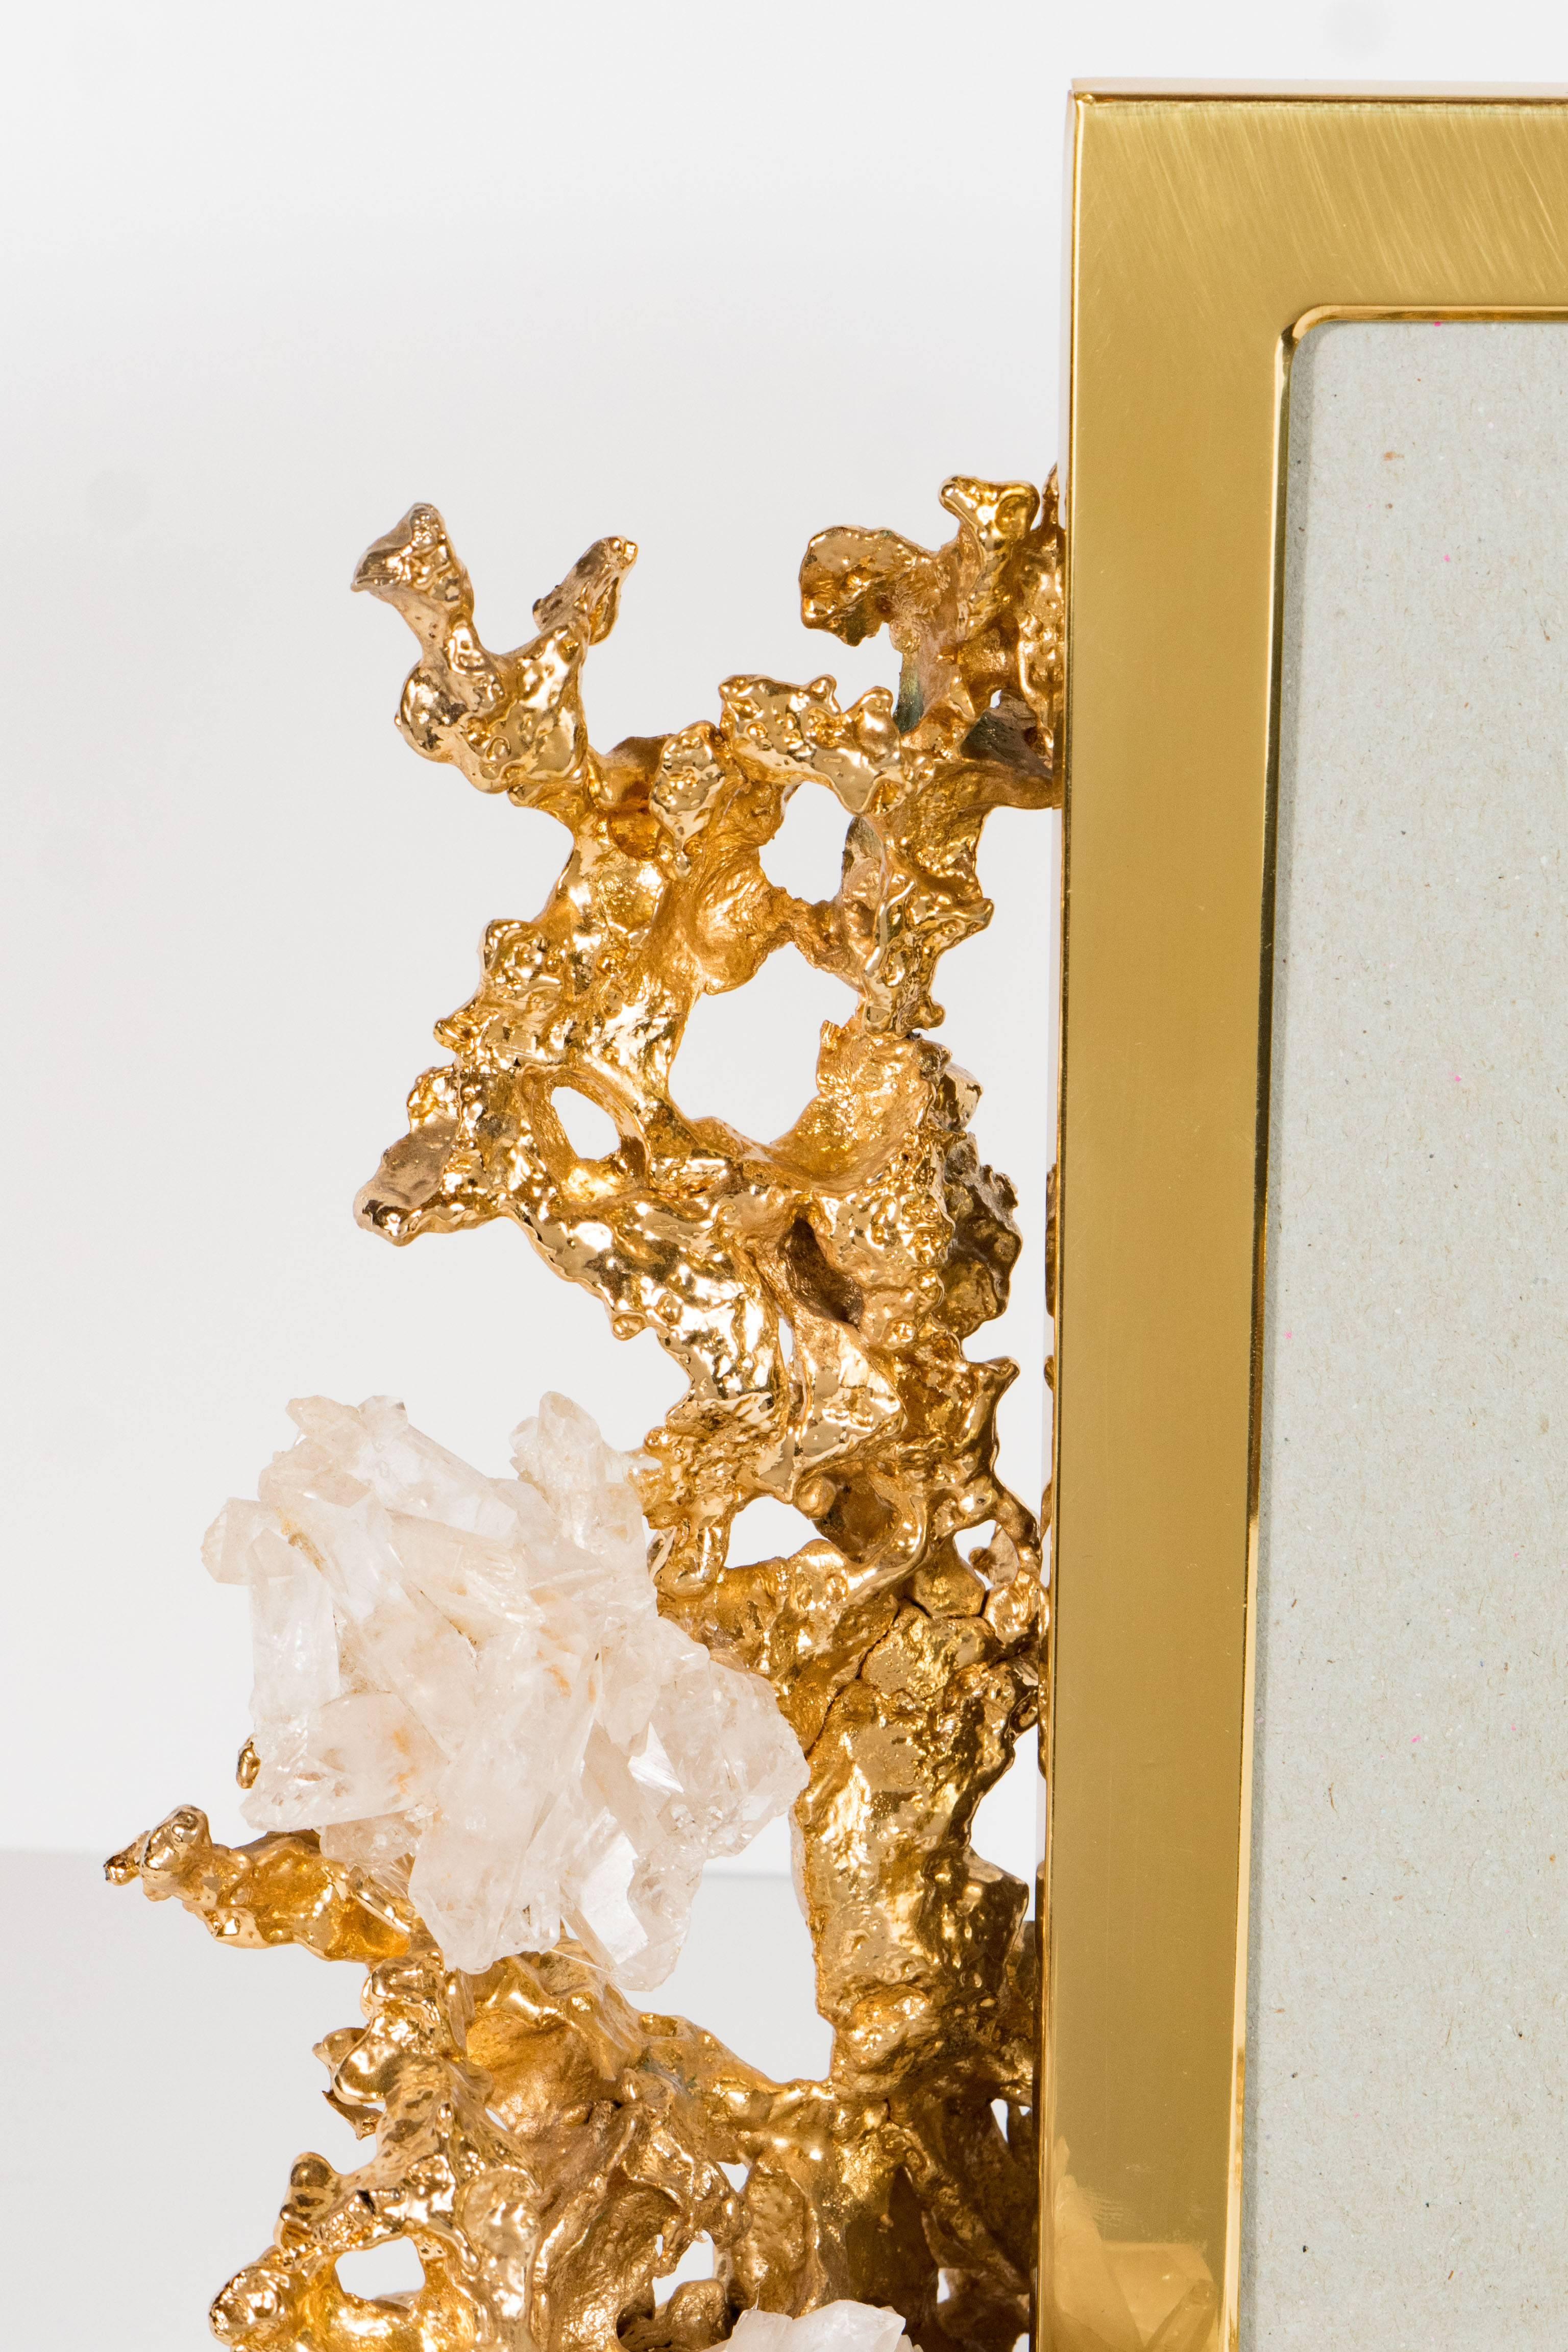 This exquisite coral-form picture frame with stand by Claude Victor Boeltz with natural rock crystal prisms. One of the artists 24-karat gold plated 